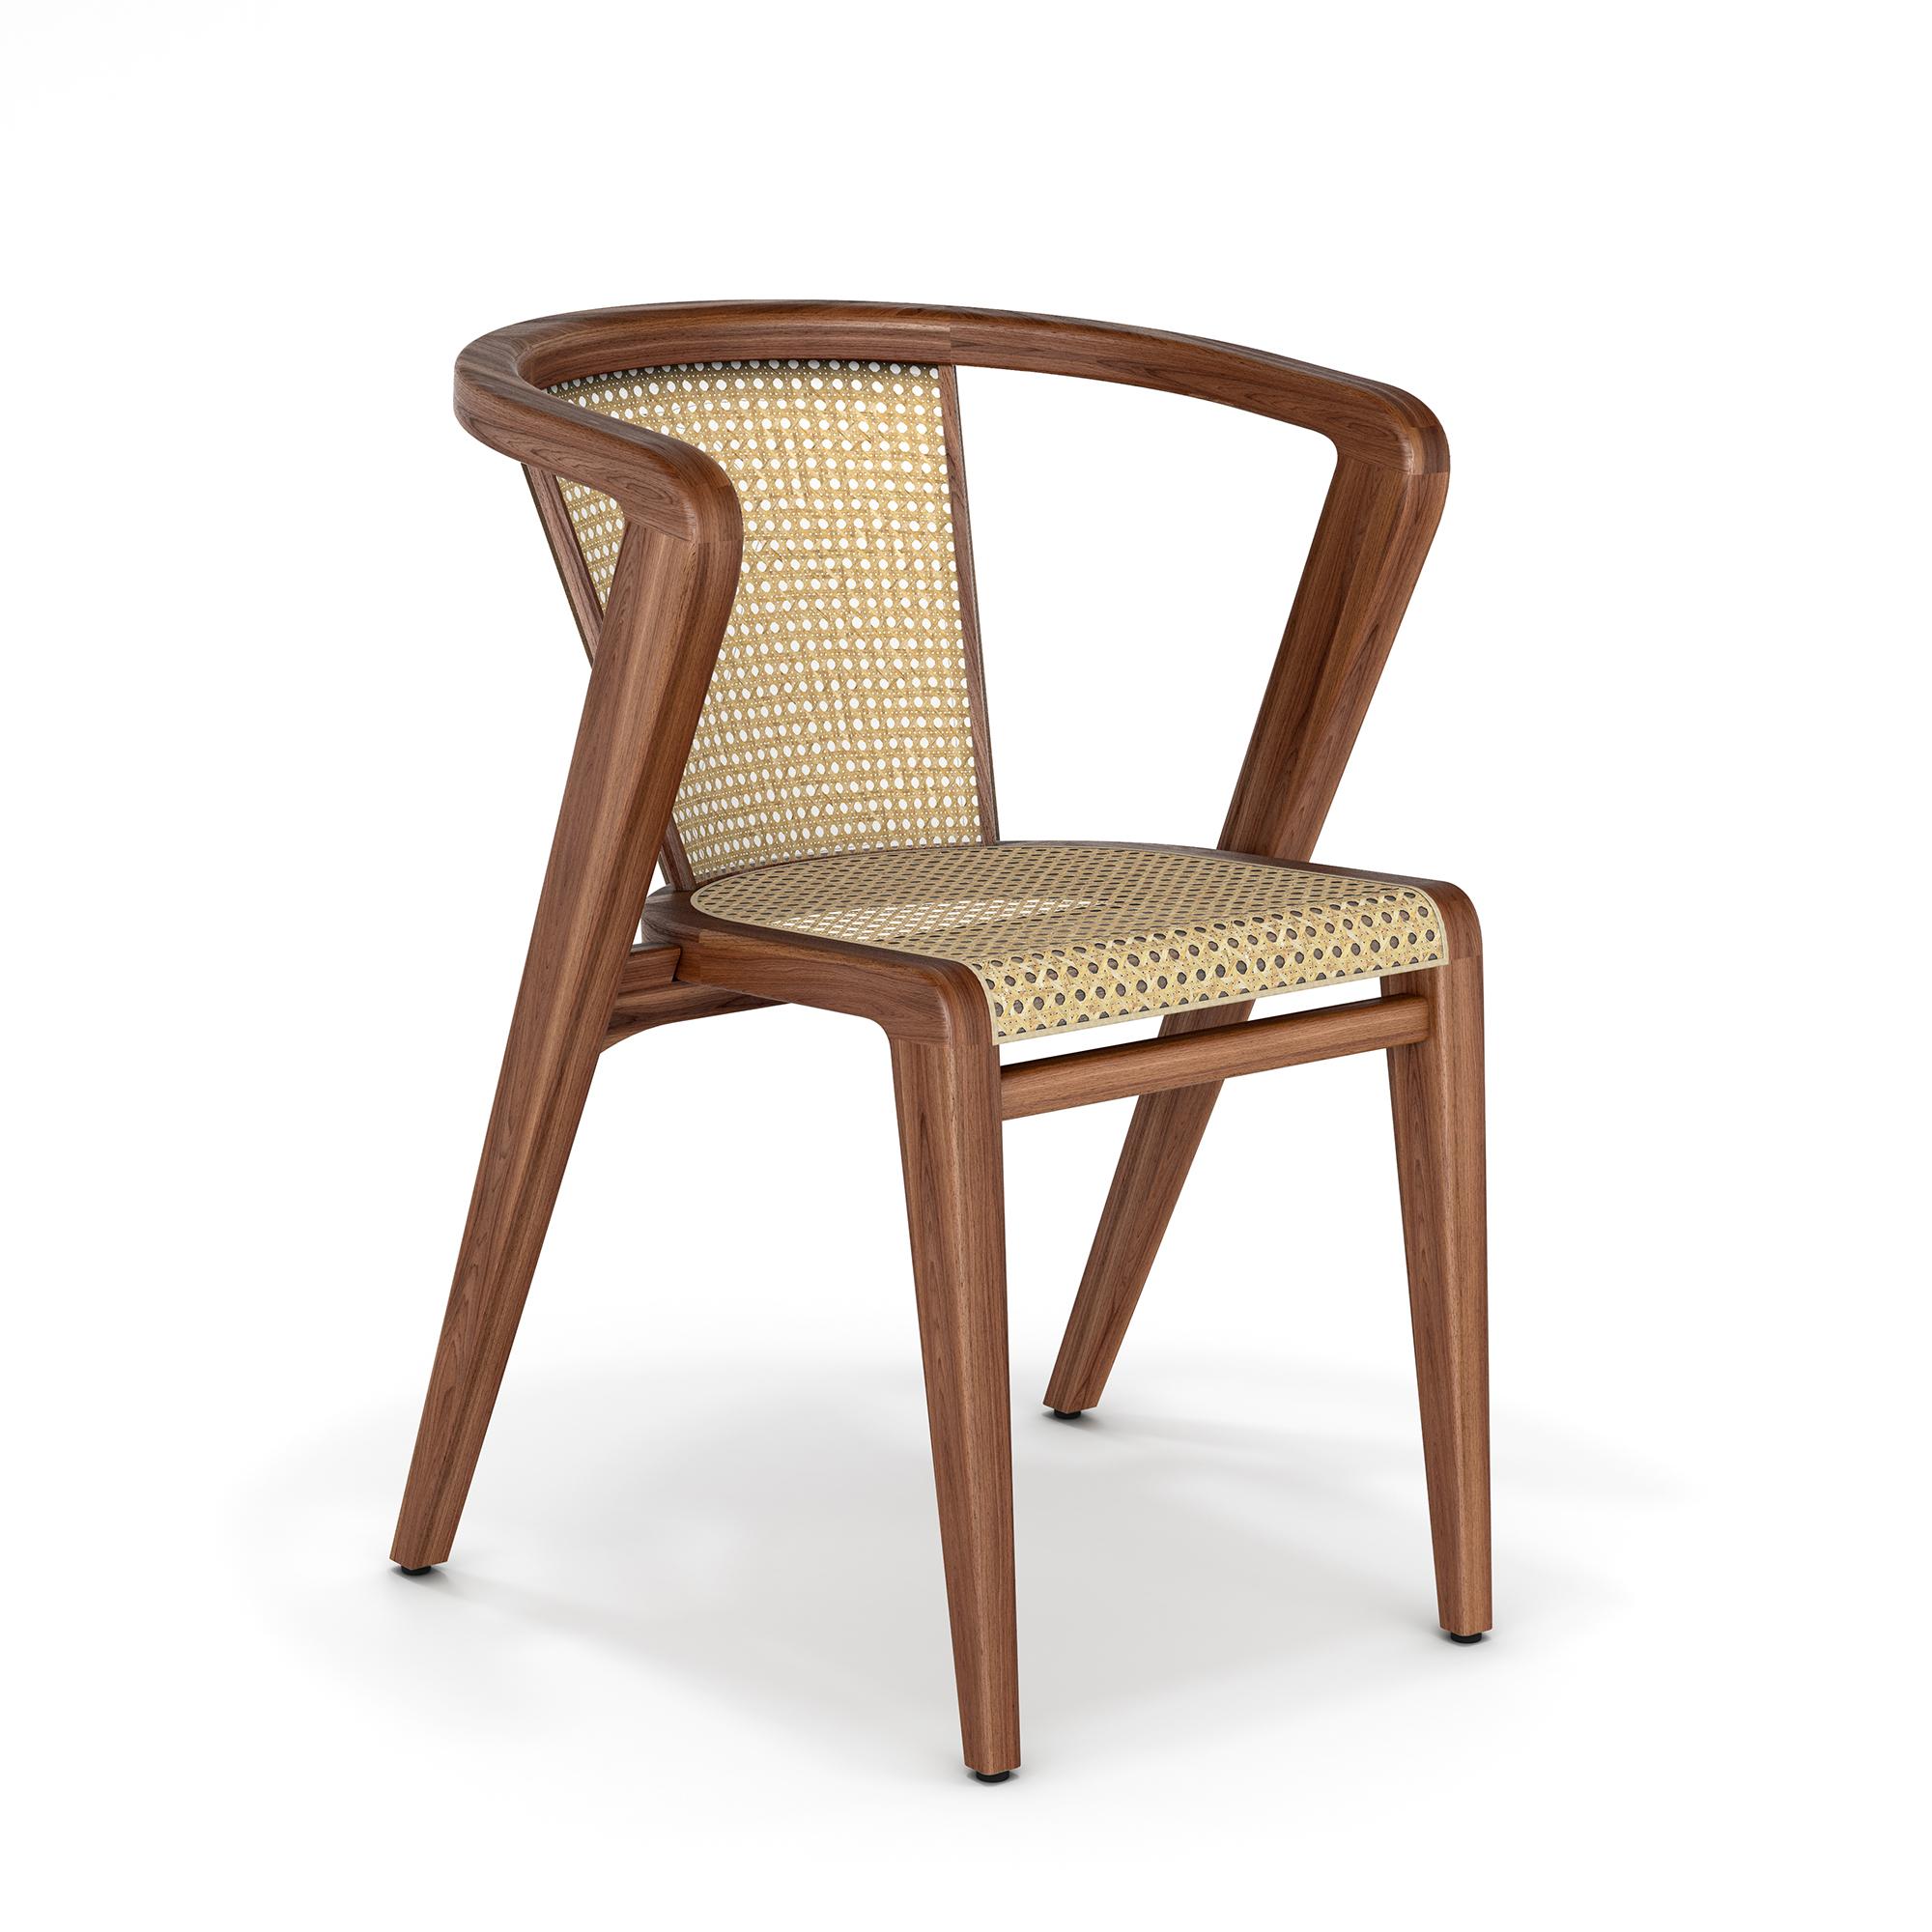 The Portuguese roots chair designed by Alexandre Caldas, is a reinterpretation of a great icon of the emblematic outdoor chair in Portugal from the late 50’s. It’s also an ambicious project of a team who believe in the cultural values and the